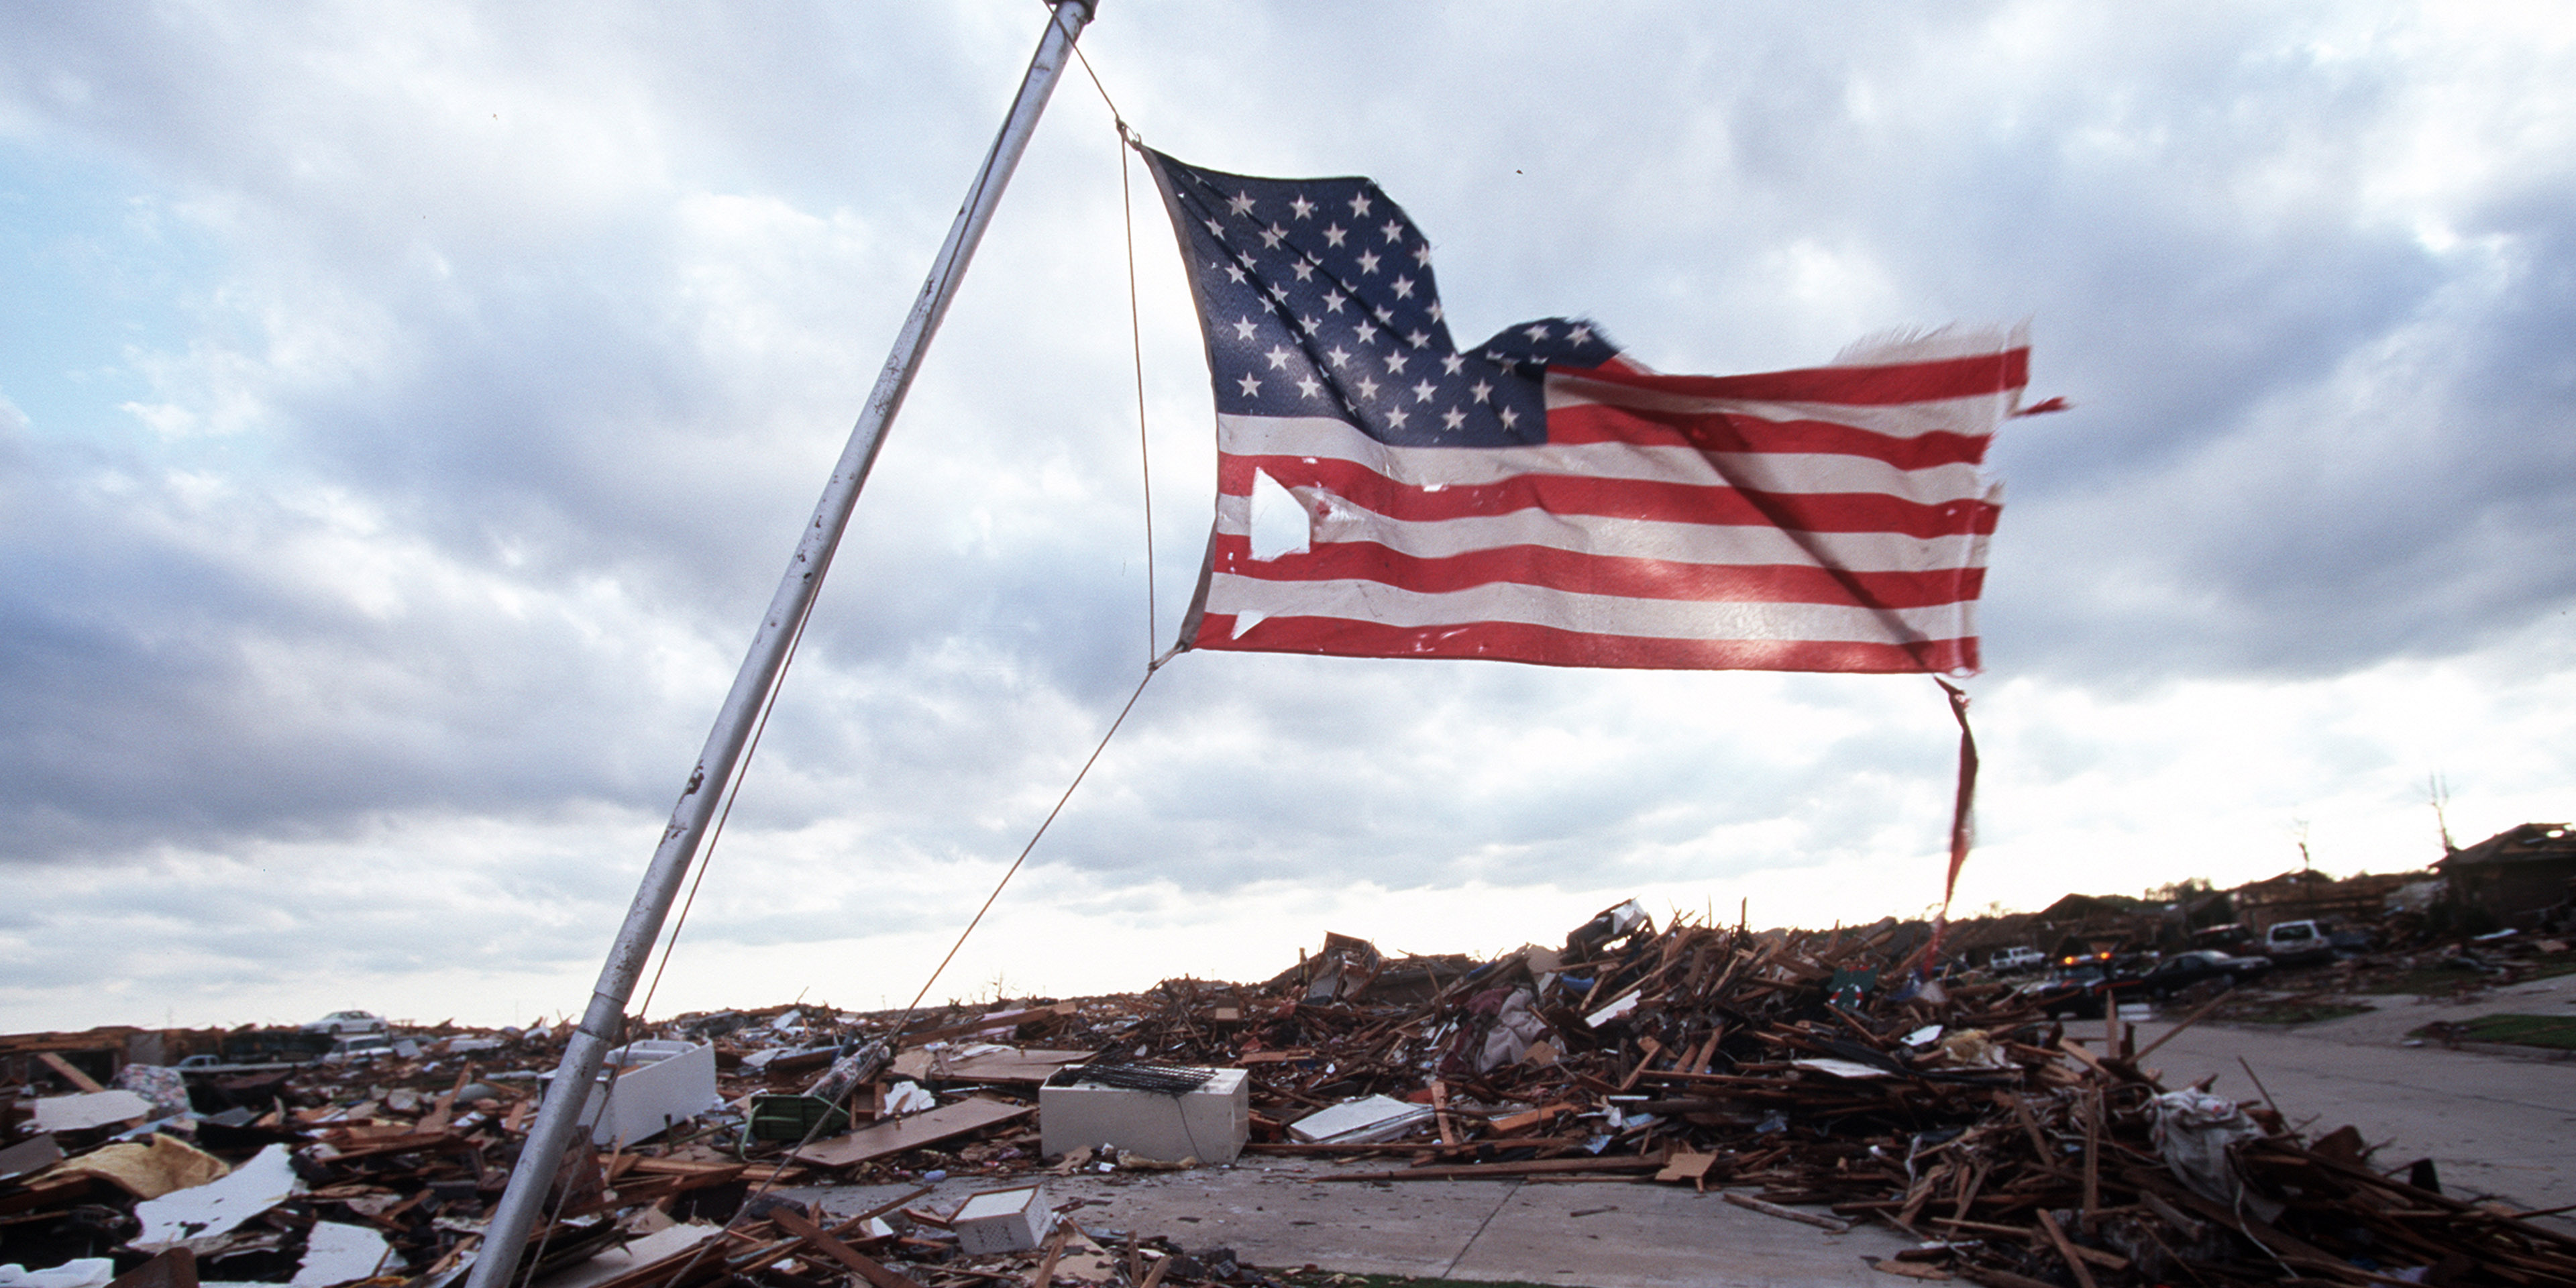 Tattered American flag flies over area devastated by tornado